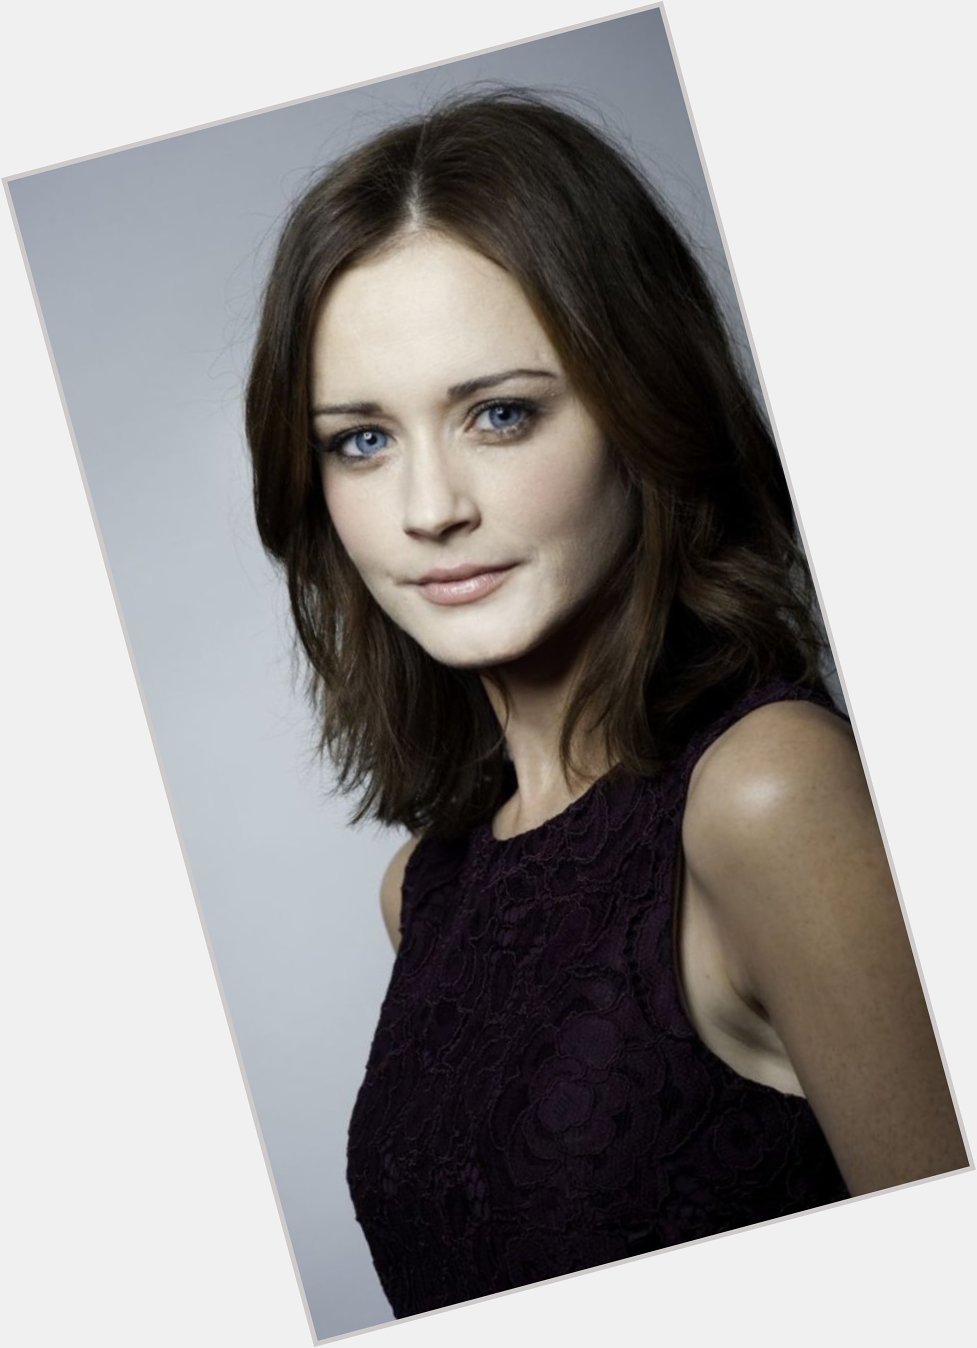 Happy Birthday to a great actress Alexis Bledel may Rory Gilmore Live on forever 